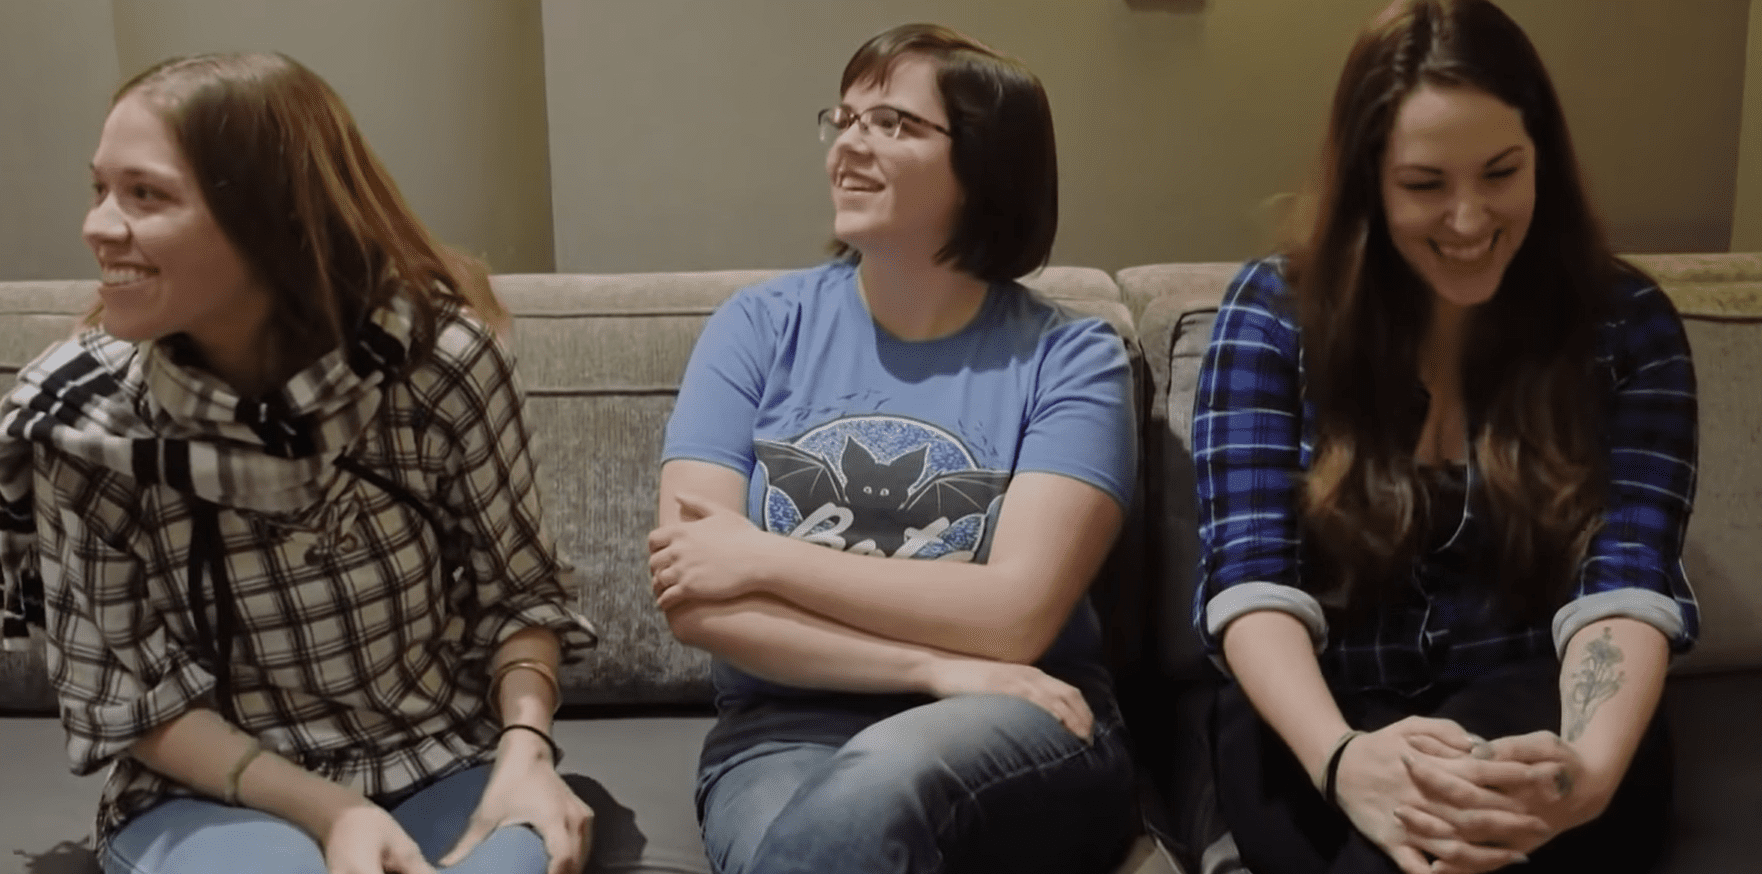 Melissa Daniels and her donor sisters meeting for the first time and waiting for their donor father. | Source: youtube.com/NBC News